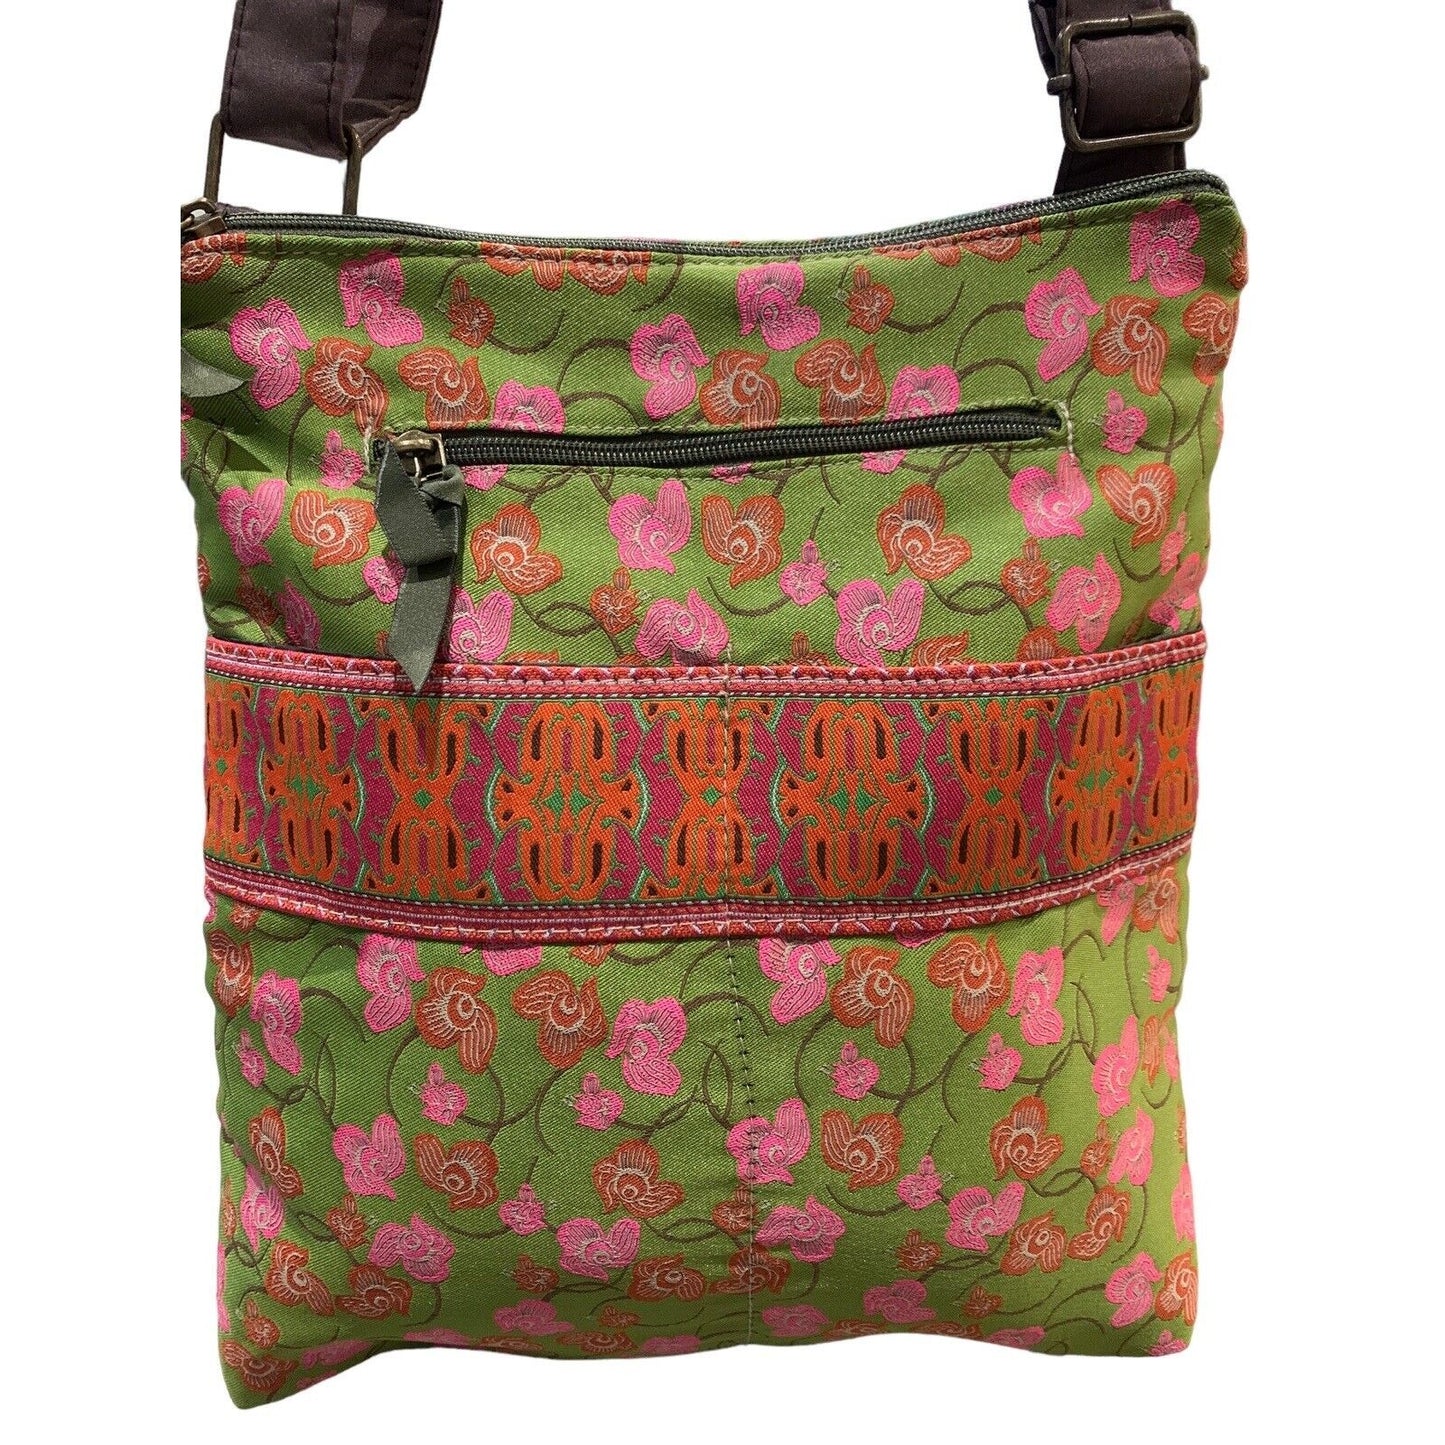 Pretty Floral Embroidered Crossbody/Convertible Shoulder Sac Bag